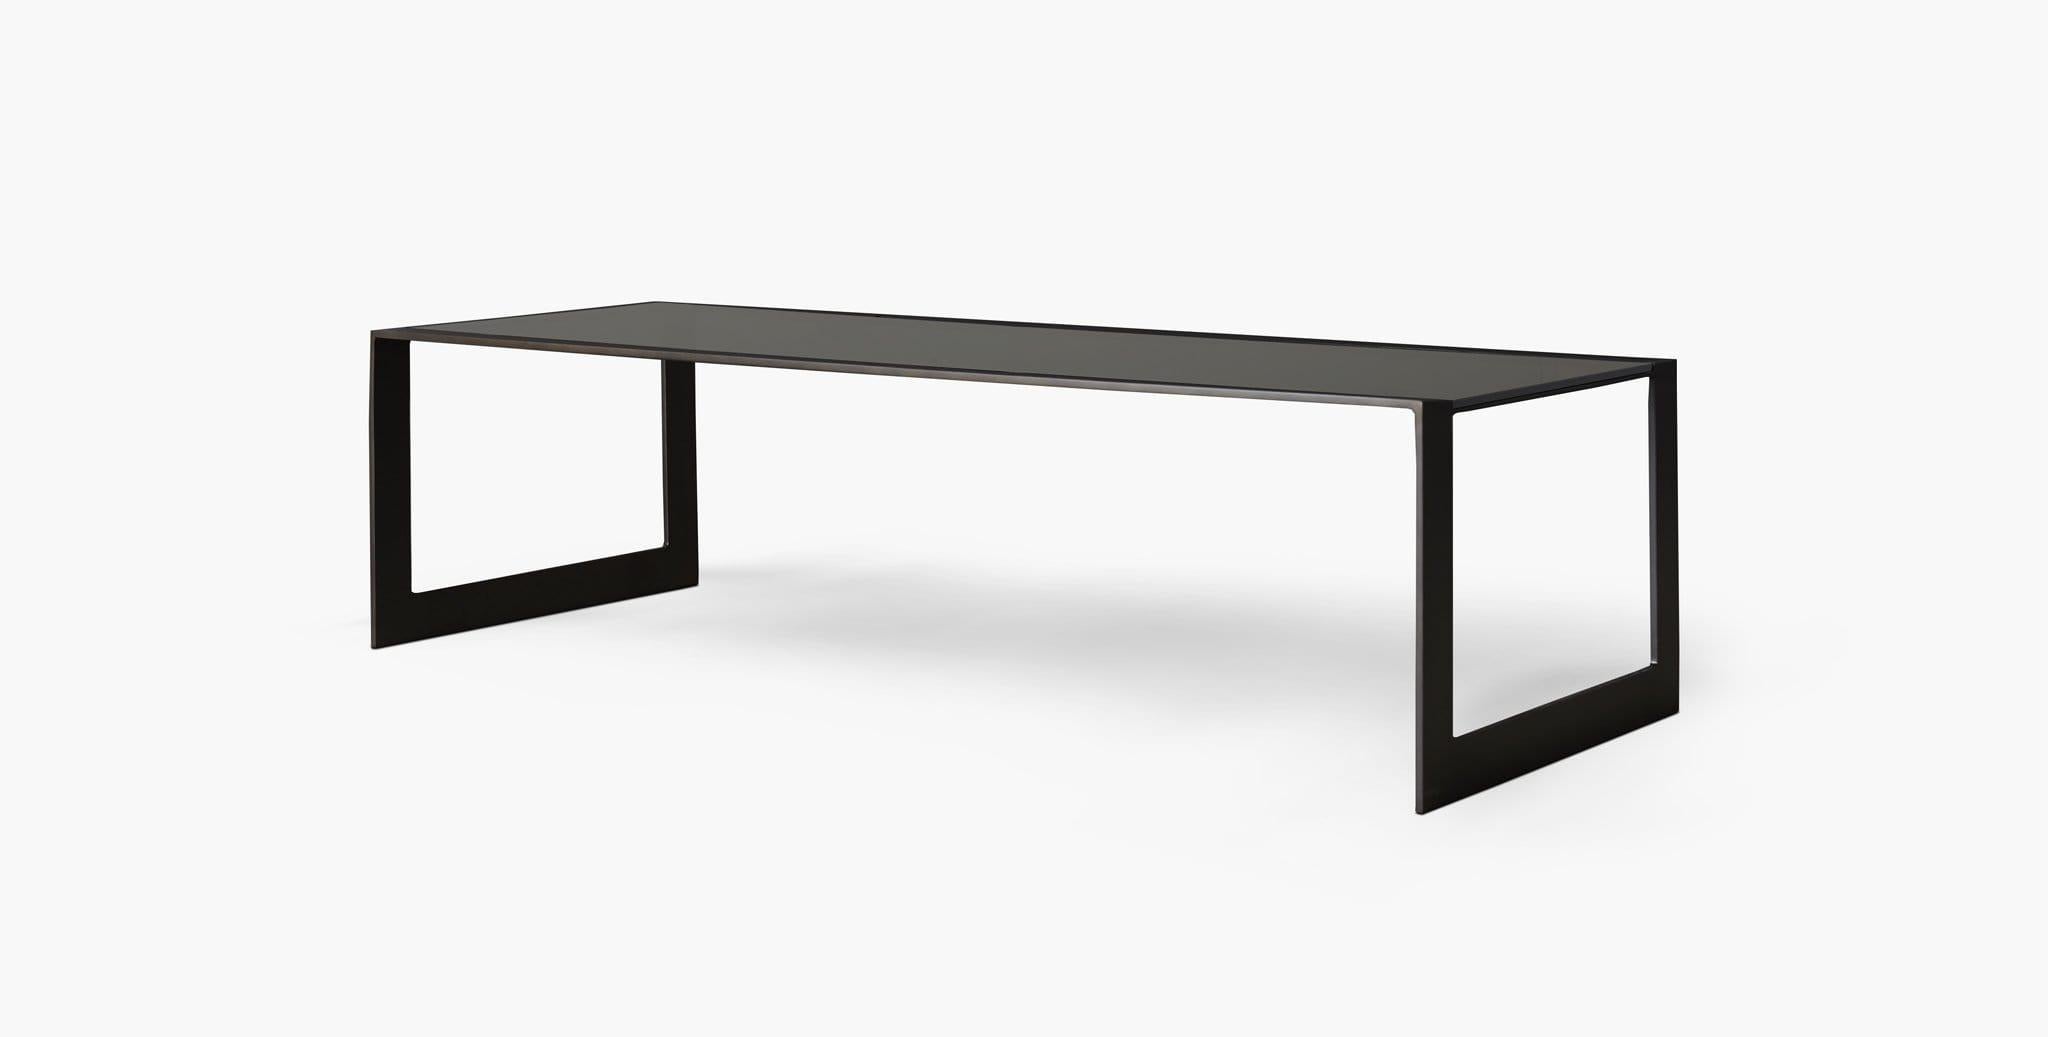 Our Hawthorn Coffee Table with its open u-leg metal base, offers clean angular lines paired with an element of texture by way of hand-laid glass. Our handcrafted fabrics, leathers, and finishes are inspired by the natural variations within fibers,